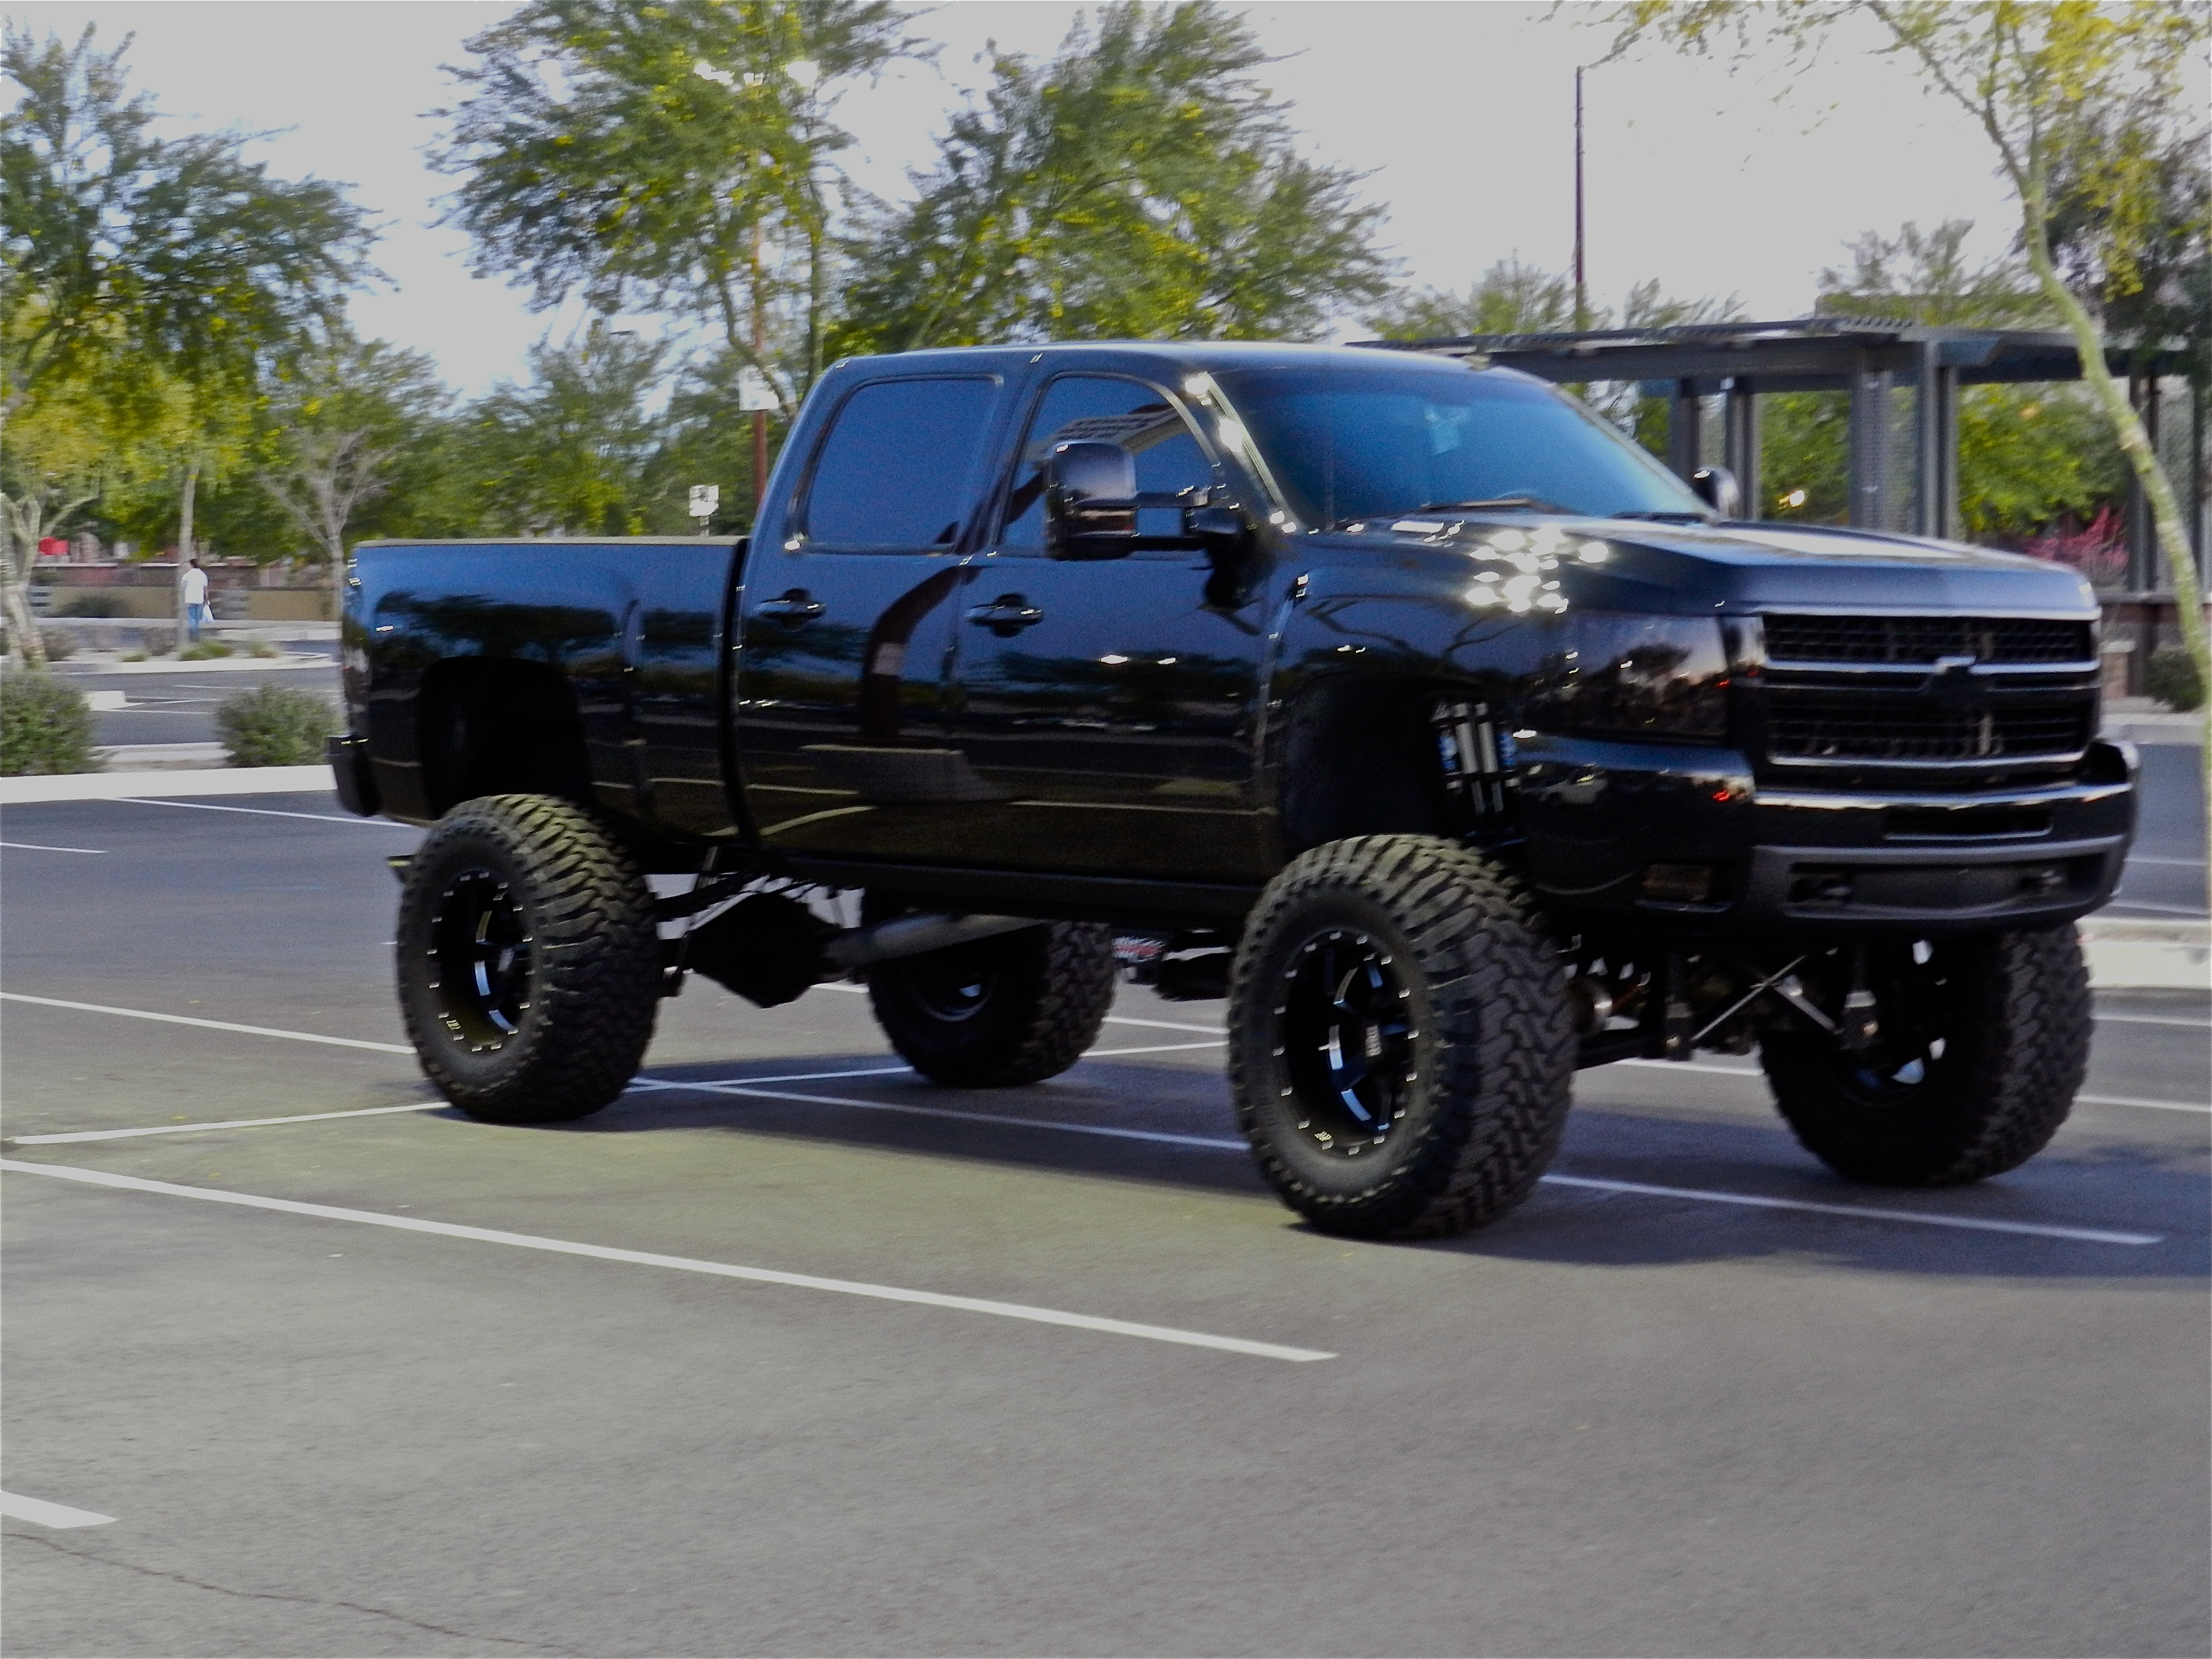 Lifted Chevy Trucks With Stacks